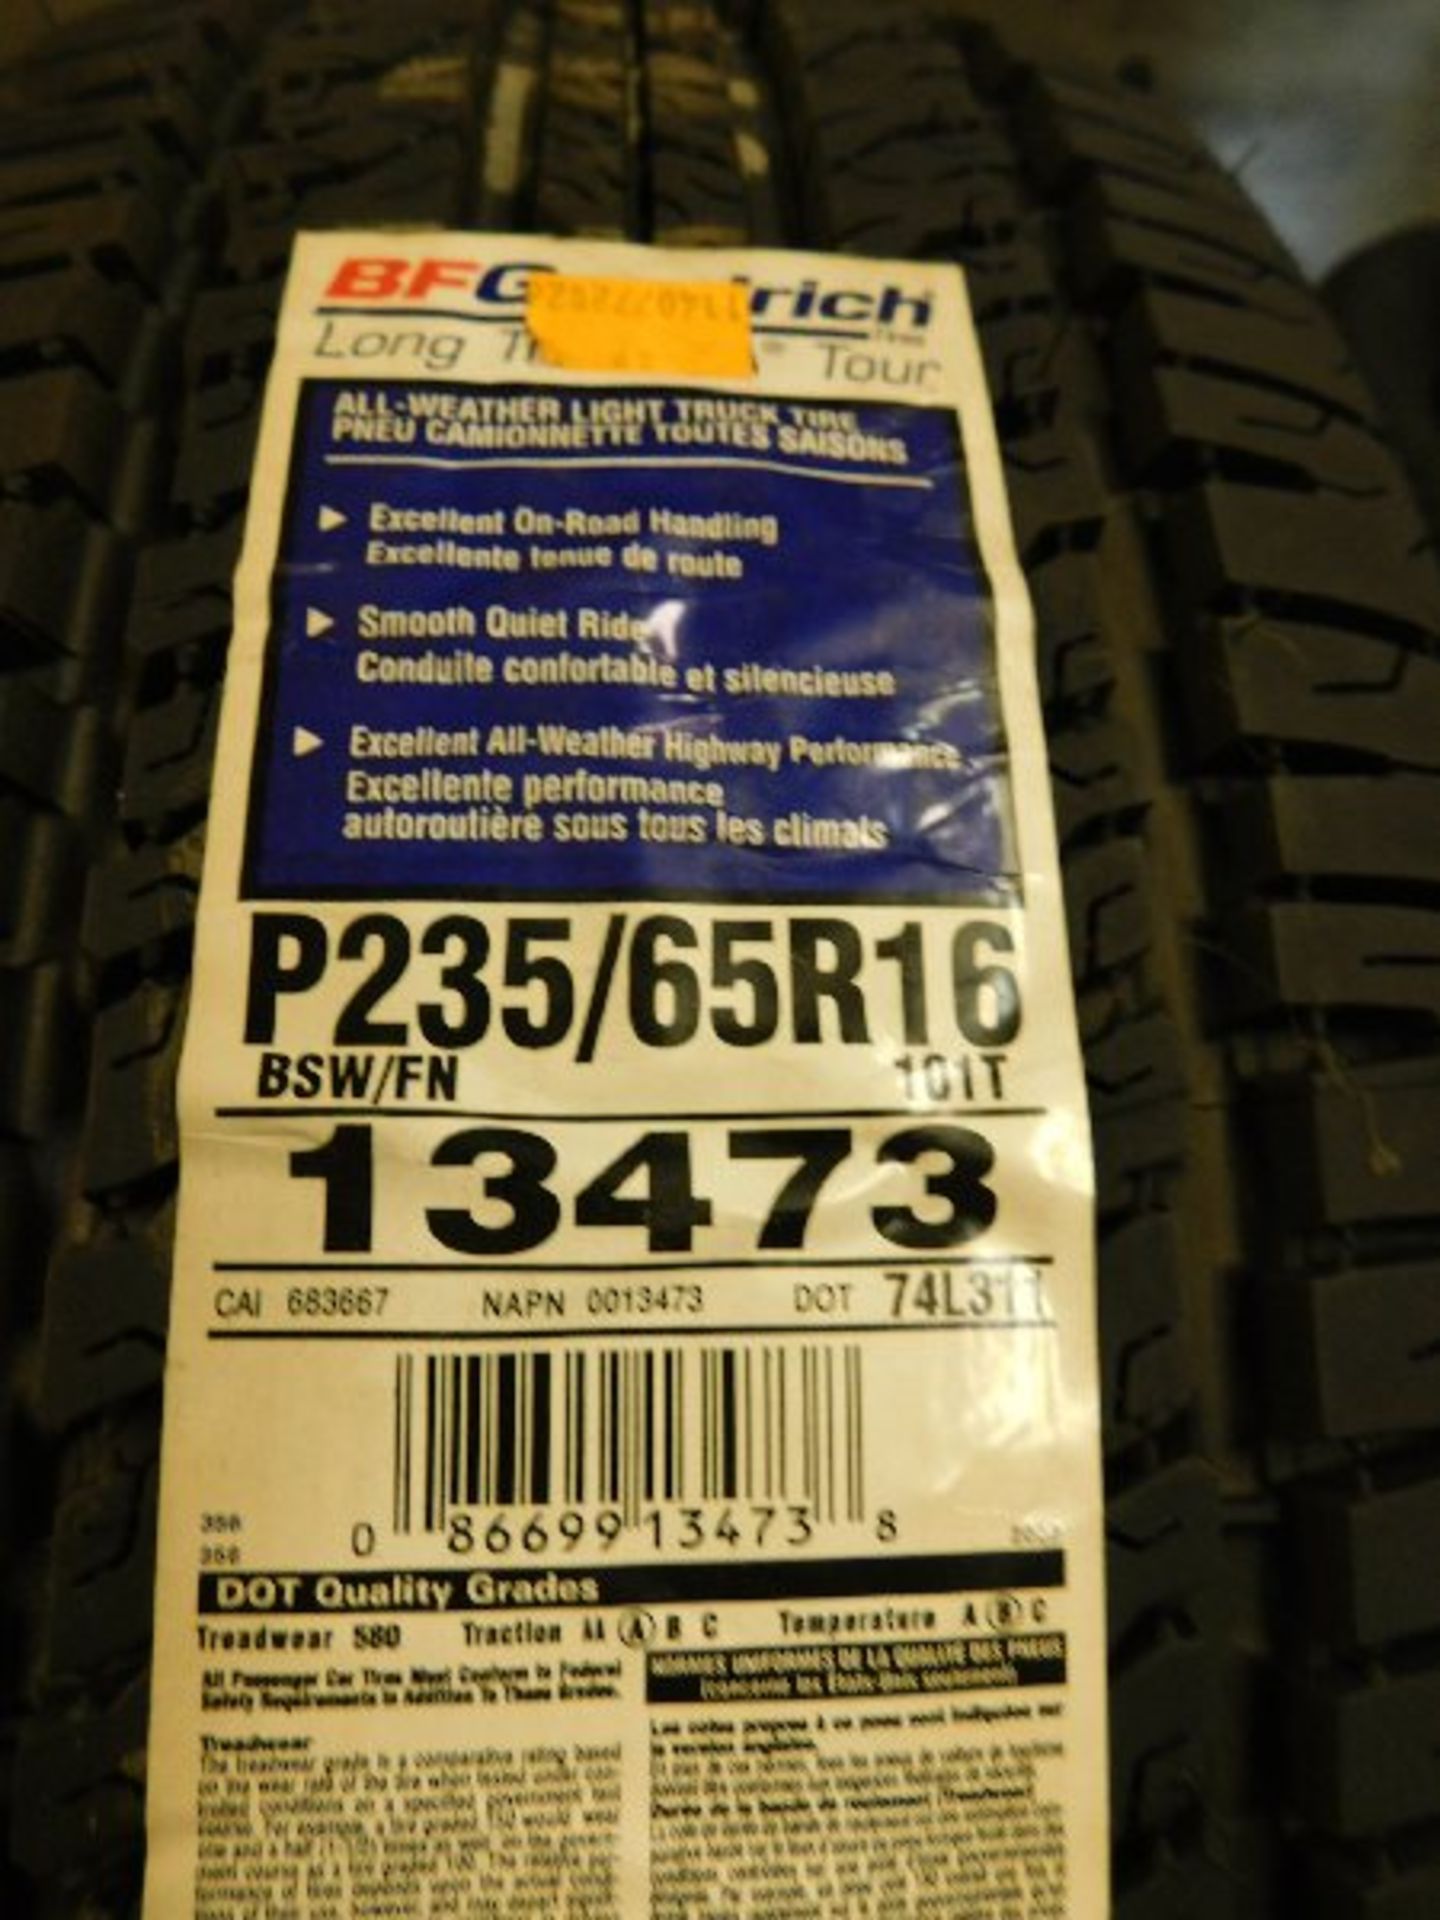 (4) BF Goodrich Long Trail T/A Tours, Tires, P235/65R16 (TAXABLE) - Image 2 of 2